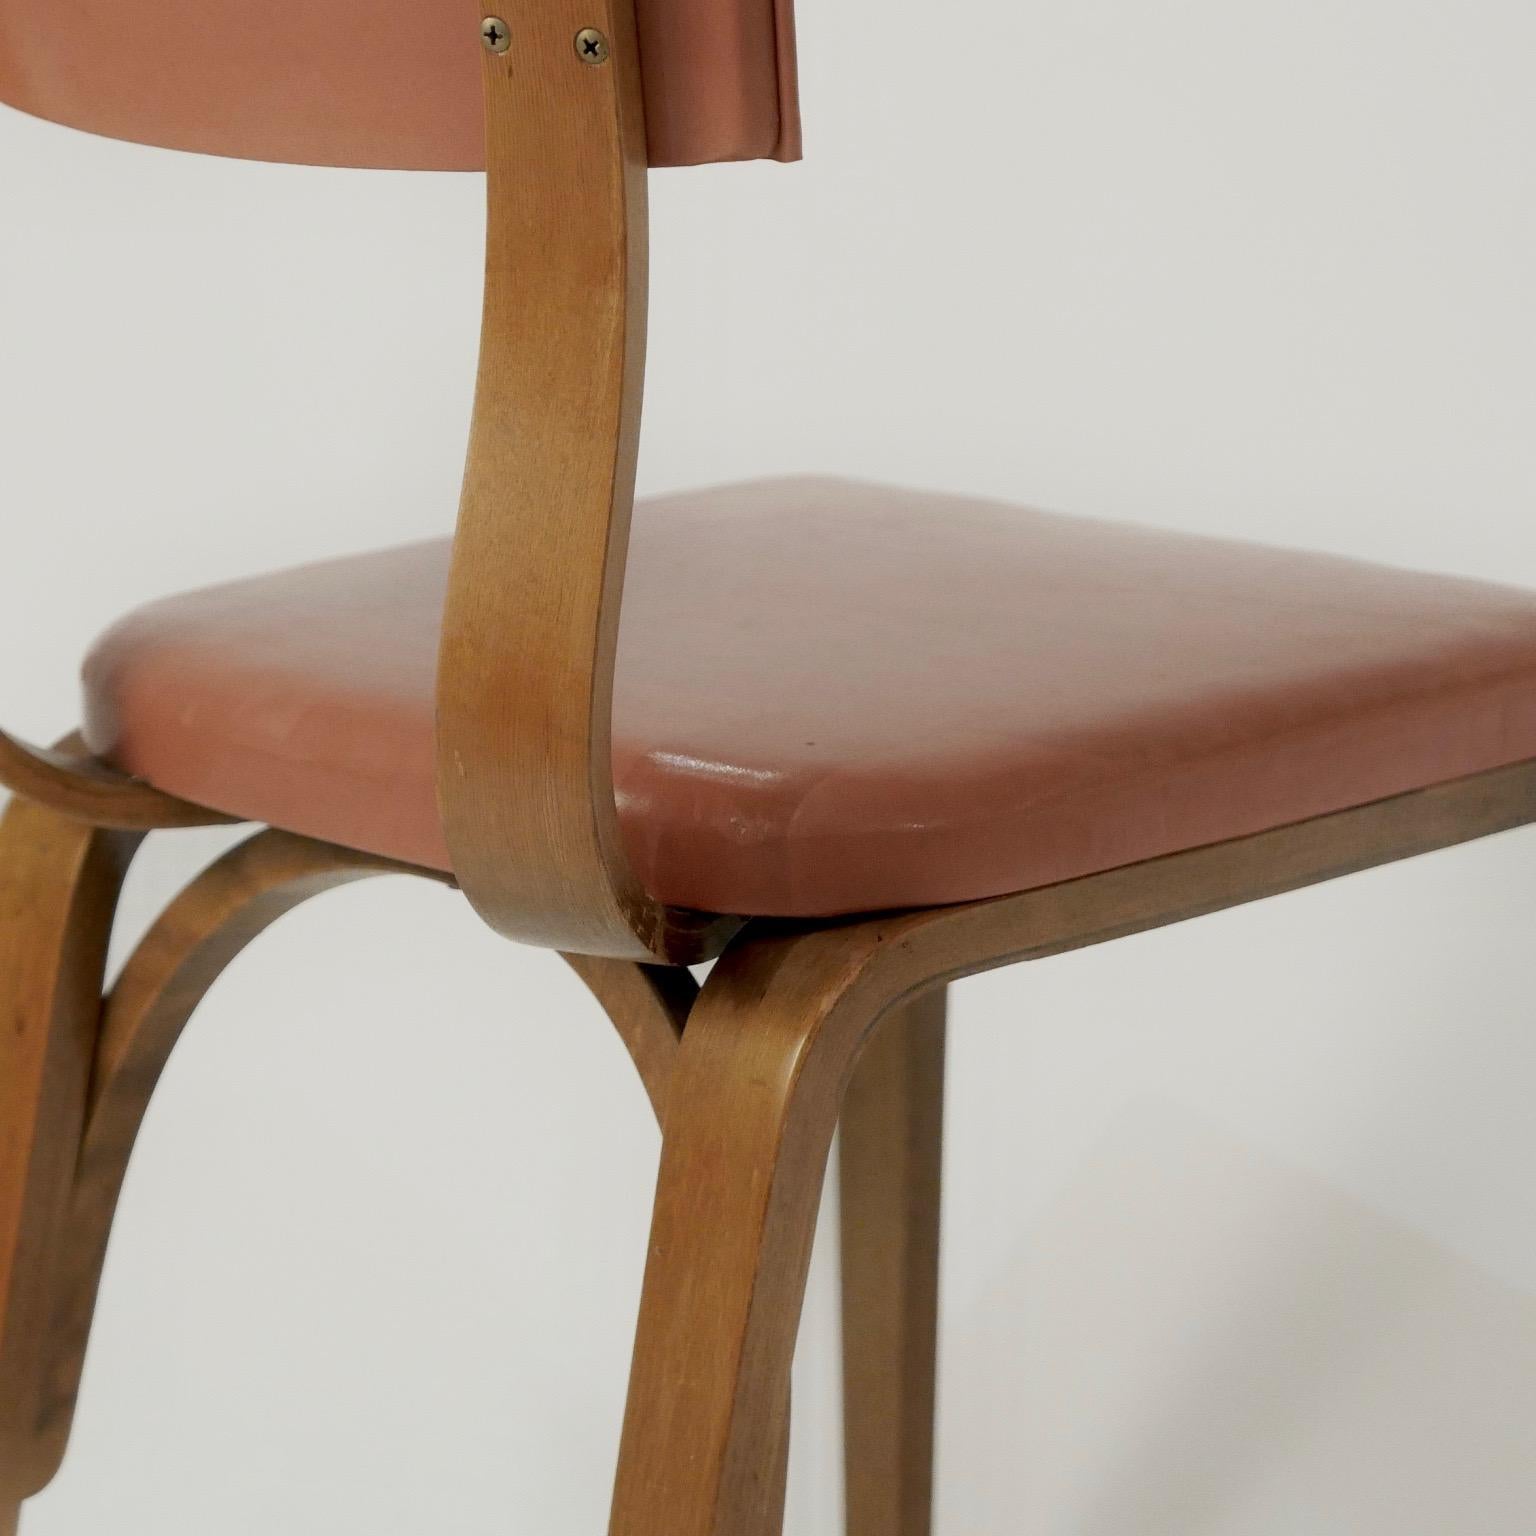 Set of 6 1950s Thonet Padded Bentwood Bent Plywood Dining, Cafe, or Desk Chairs  (Geformt)